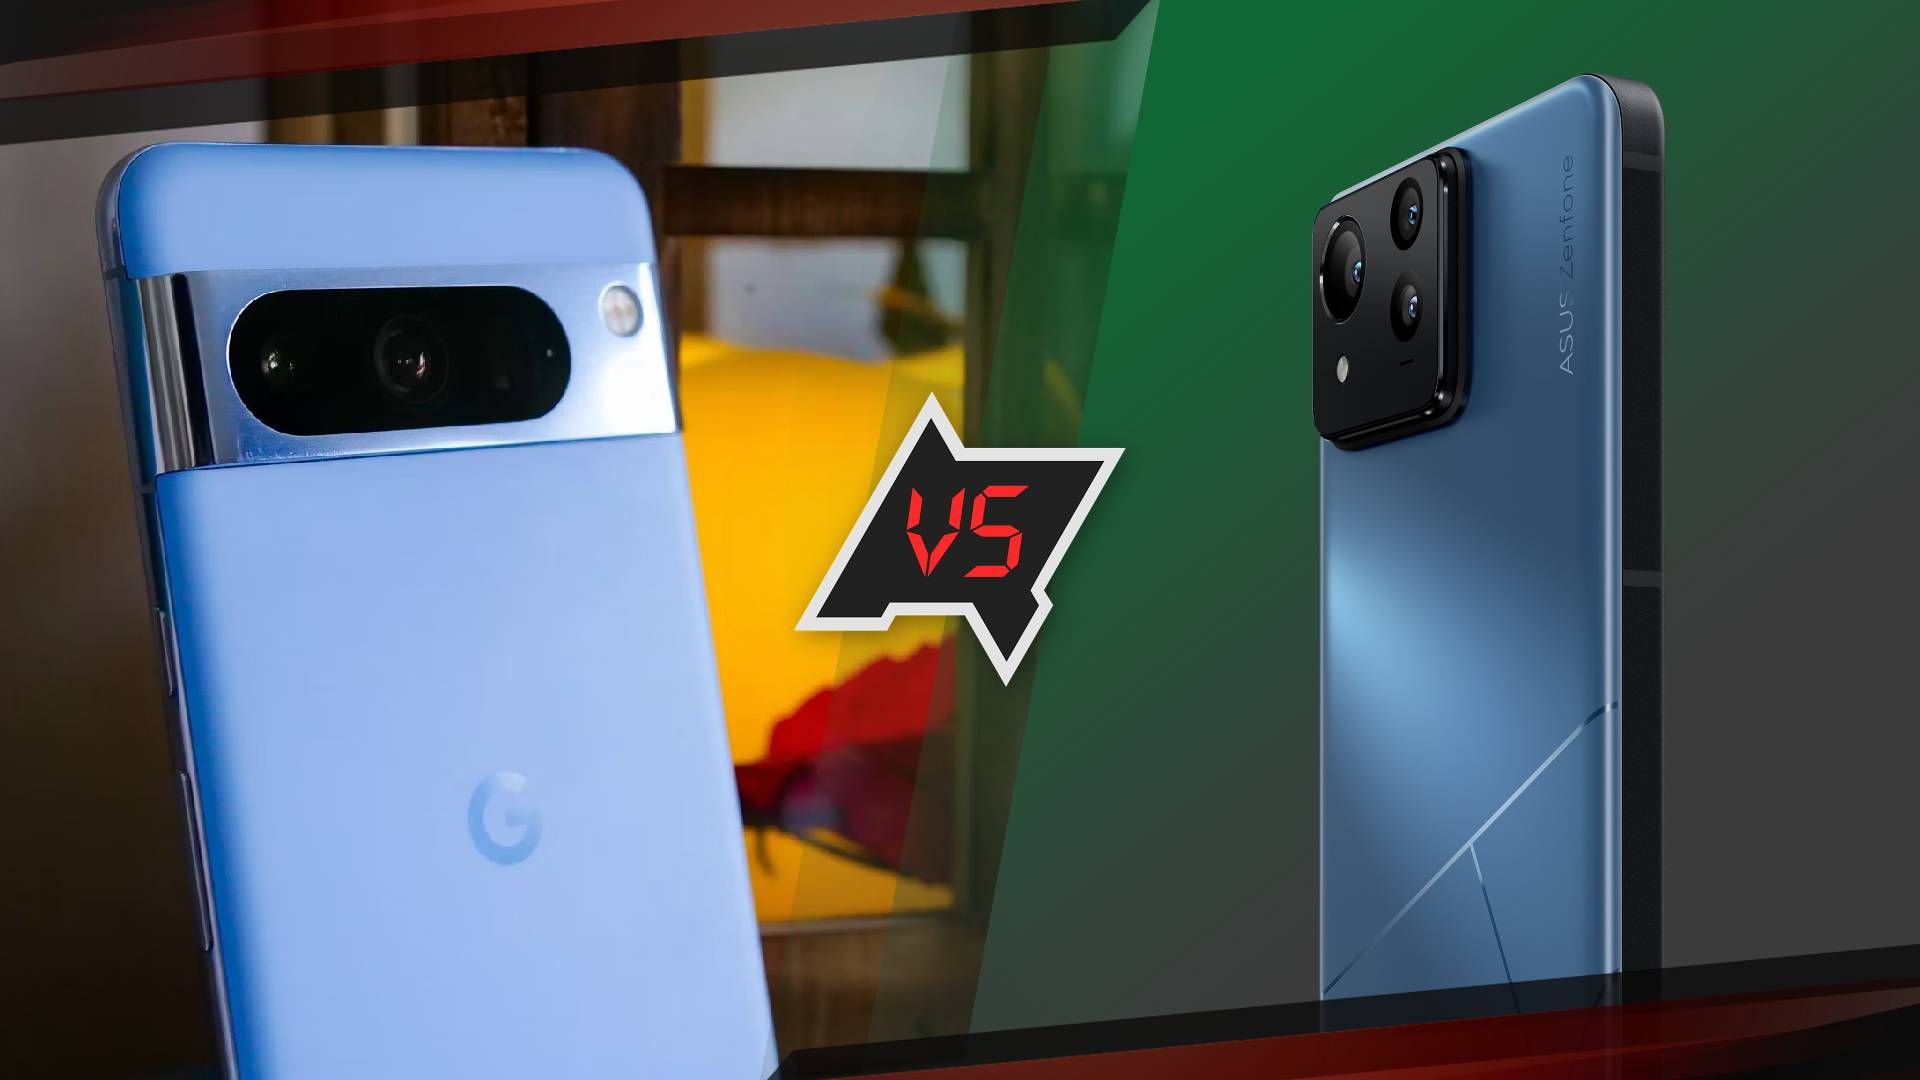 The Google Pixel 8 Pro compared to the Asus Zenfone 11 Ultra